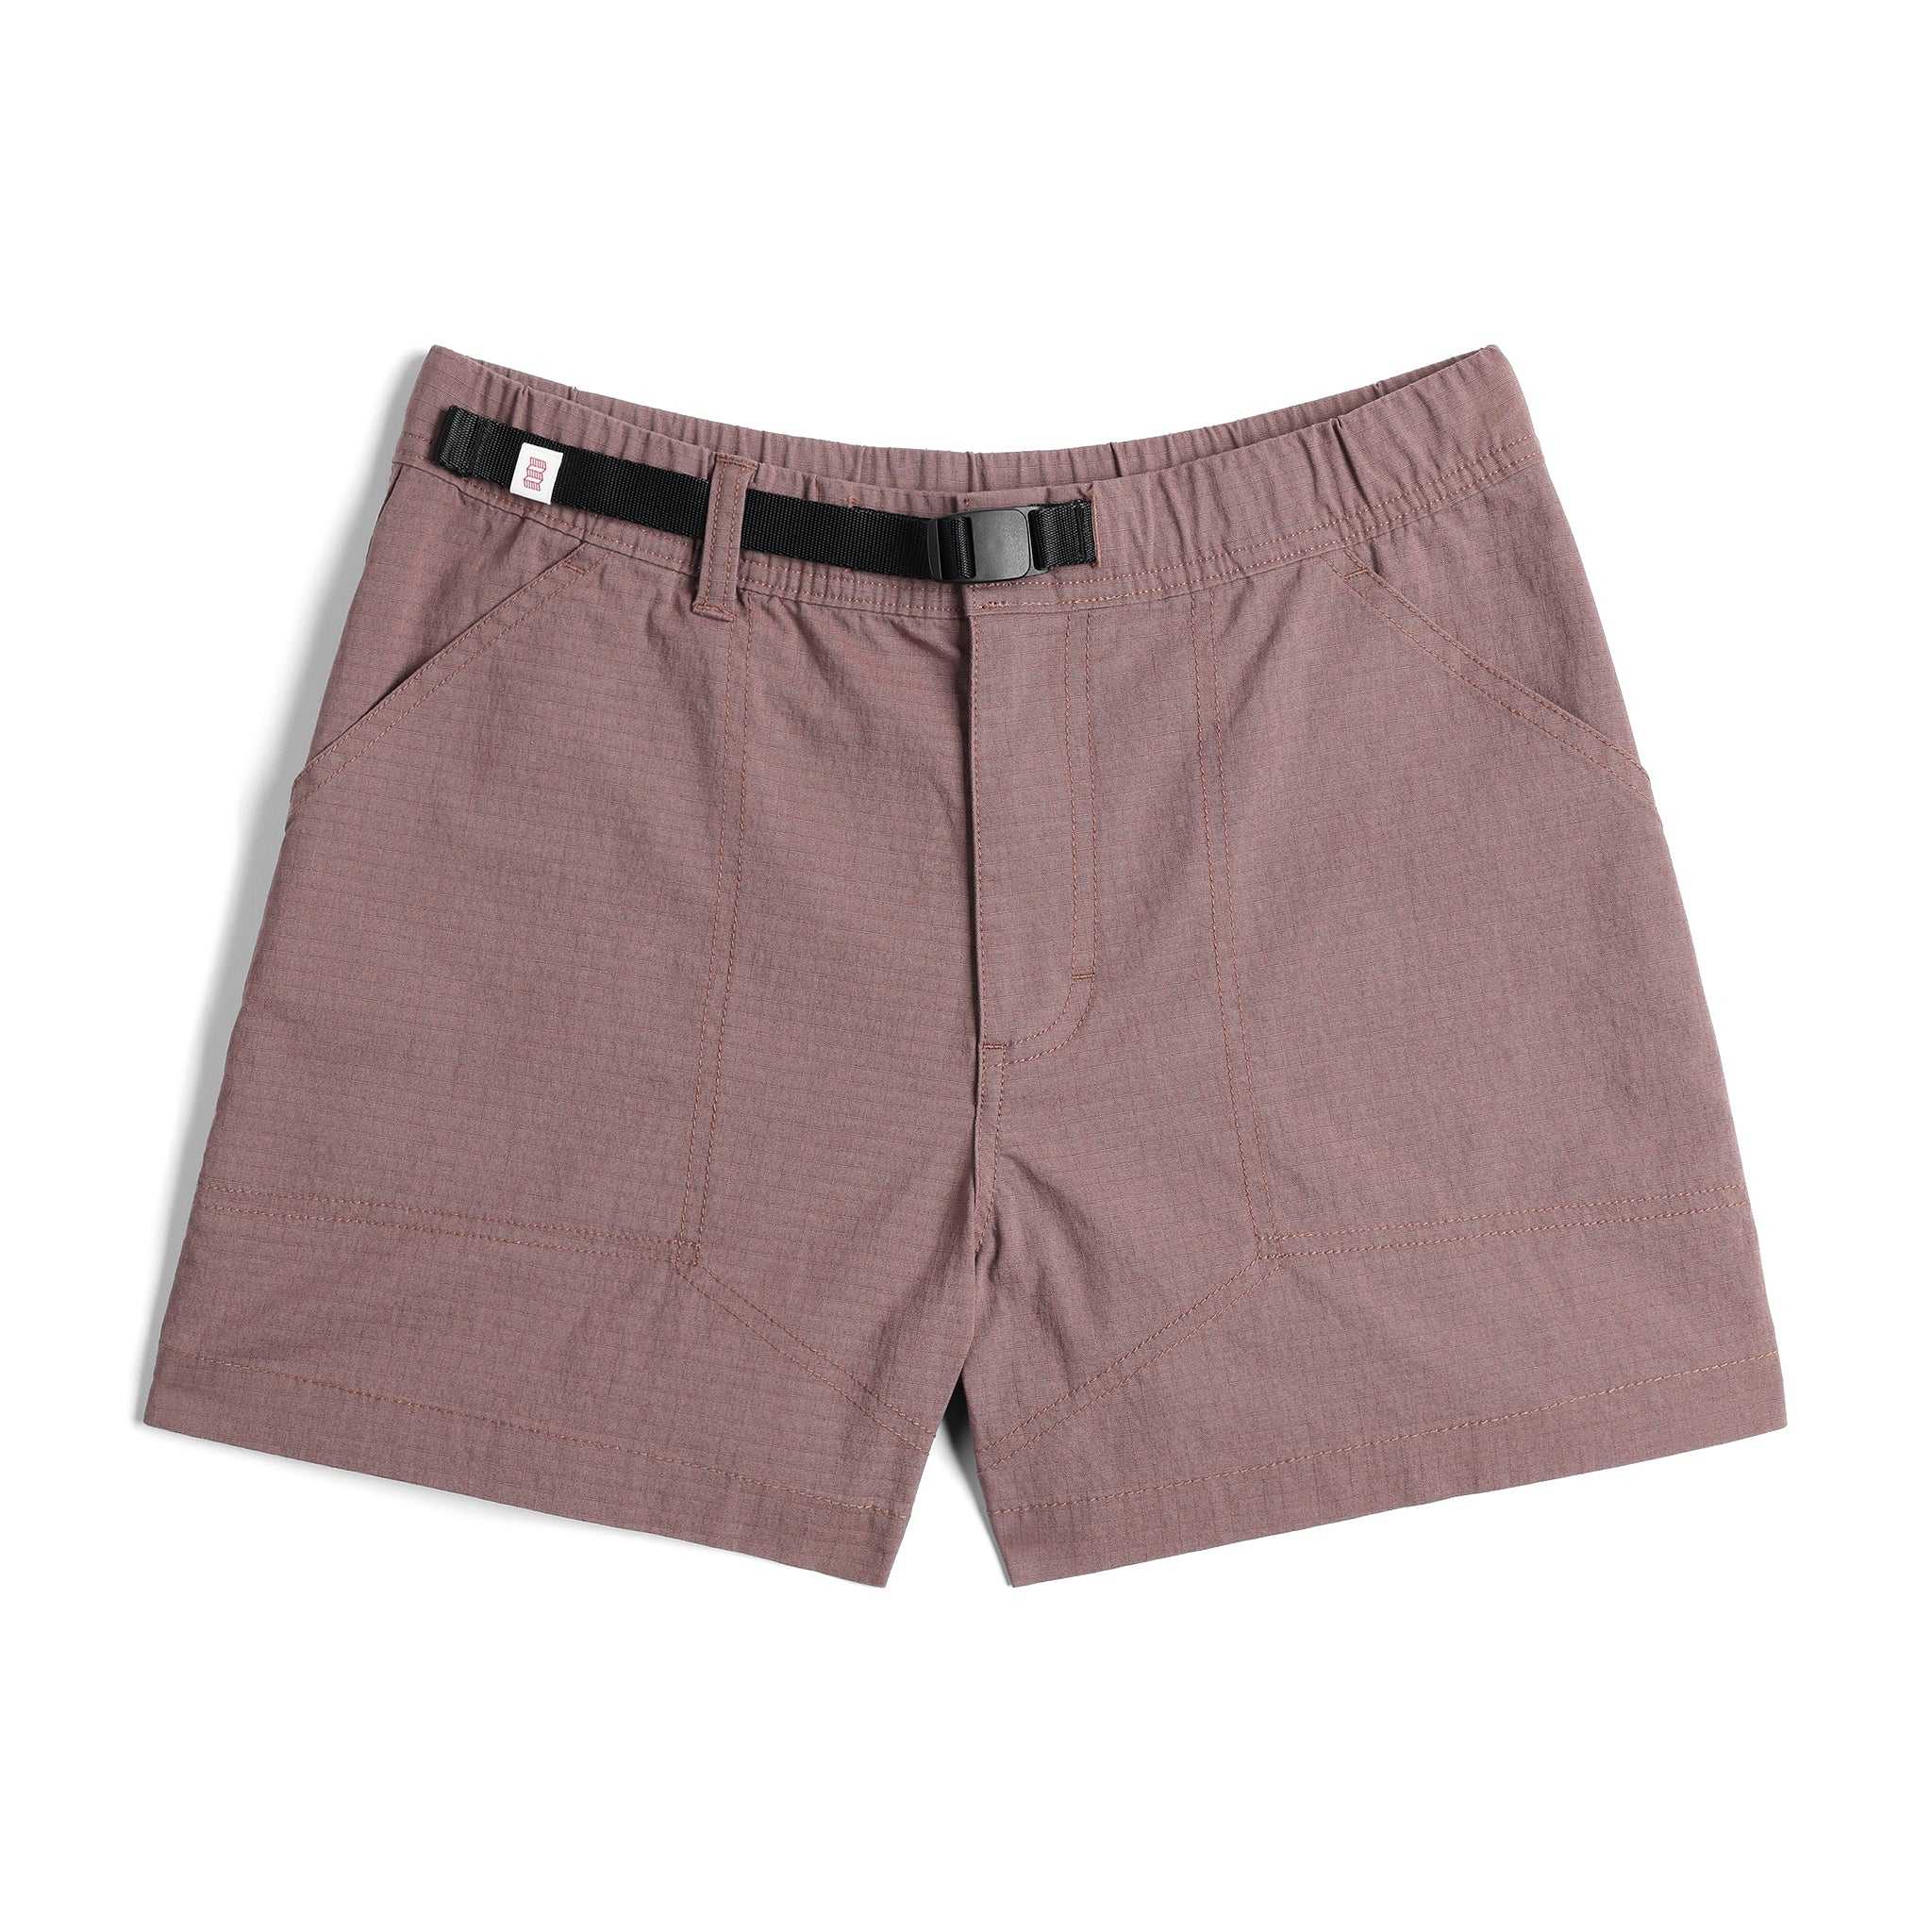 Front View of Topo Designs Mountain Short Ripstop - Women's in "Peppercorn"